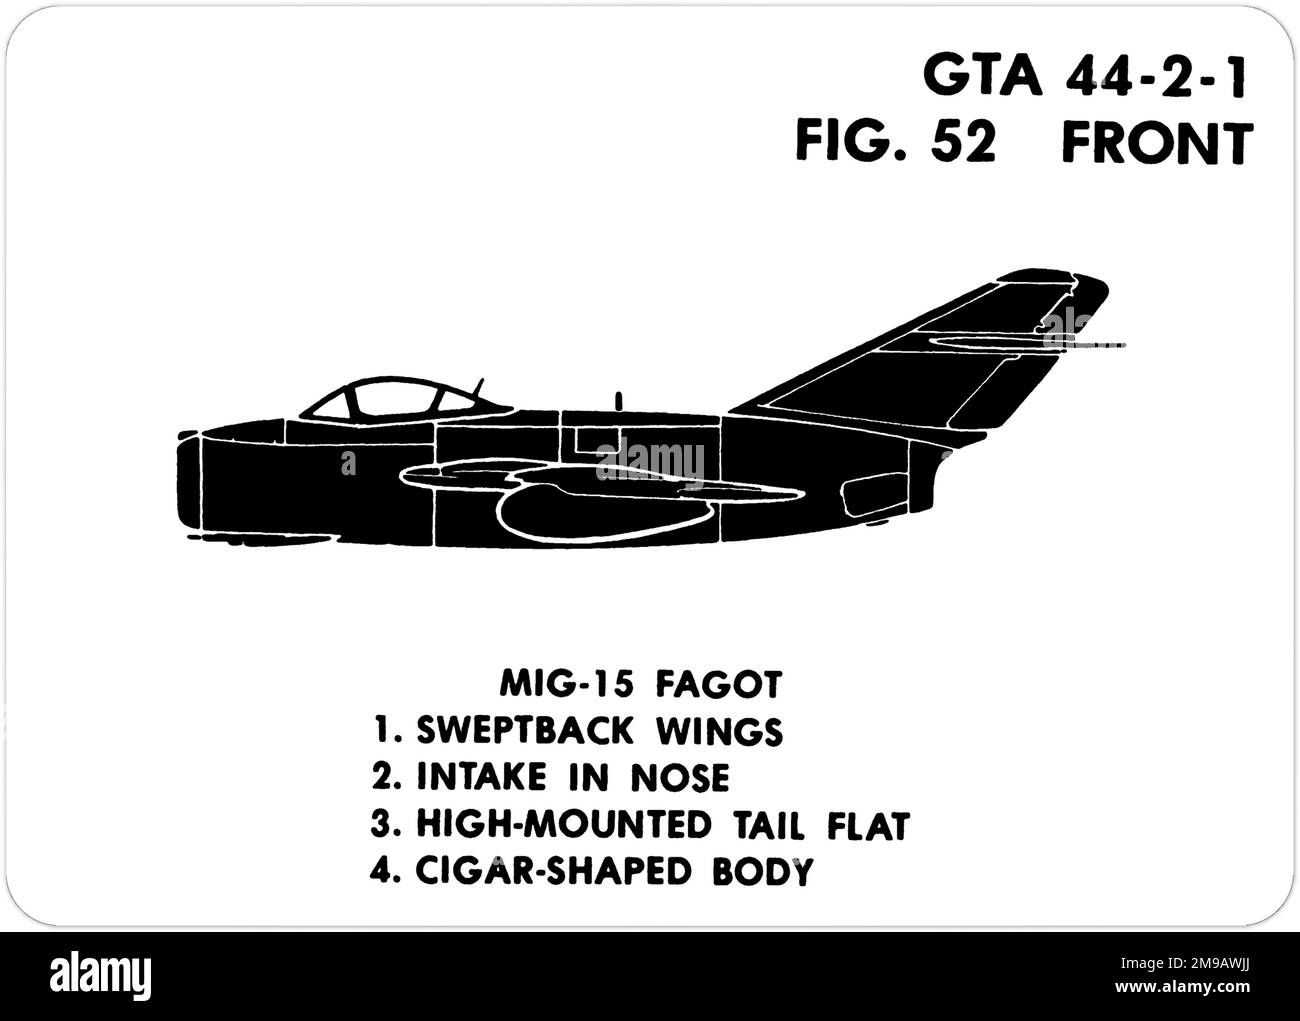 Mikoyan-Guryevich MiG-15 (NATO codename: Fagot). This is one of the series of Graphics Training Aids (GTA) used by the United States Army to train their personnel to recognize friendly and hostile aircraft. This particular set, GTA 44-2-1, was issued in July1977. The set features aircraft from: Canada, Italy, United Kingdom, United States, and the USSR. Stock Photo